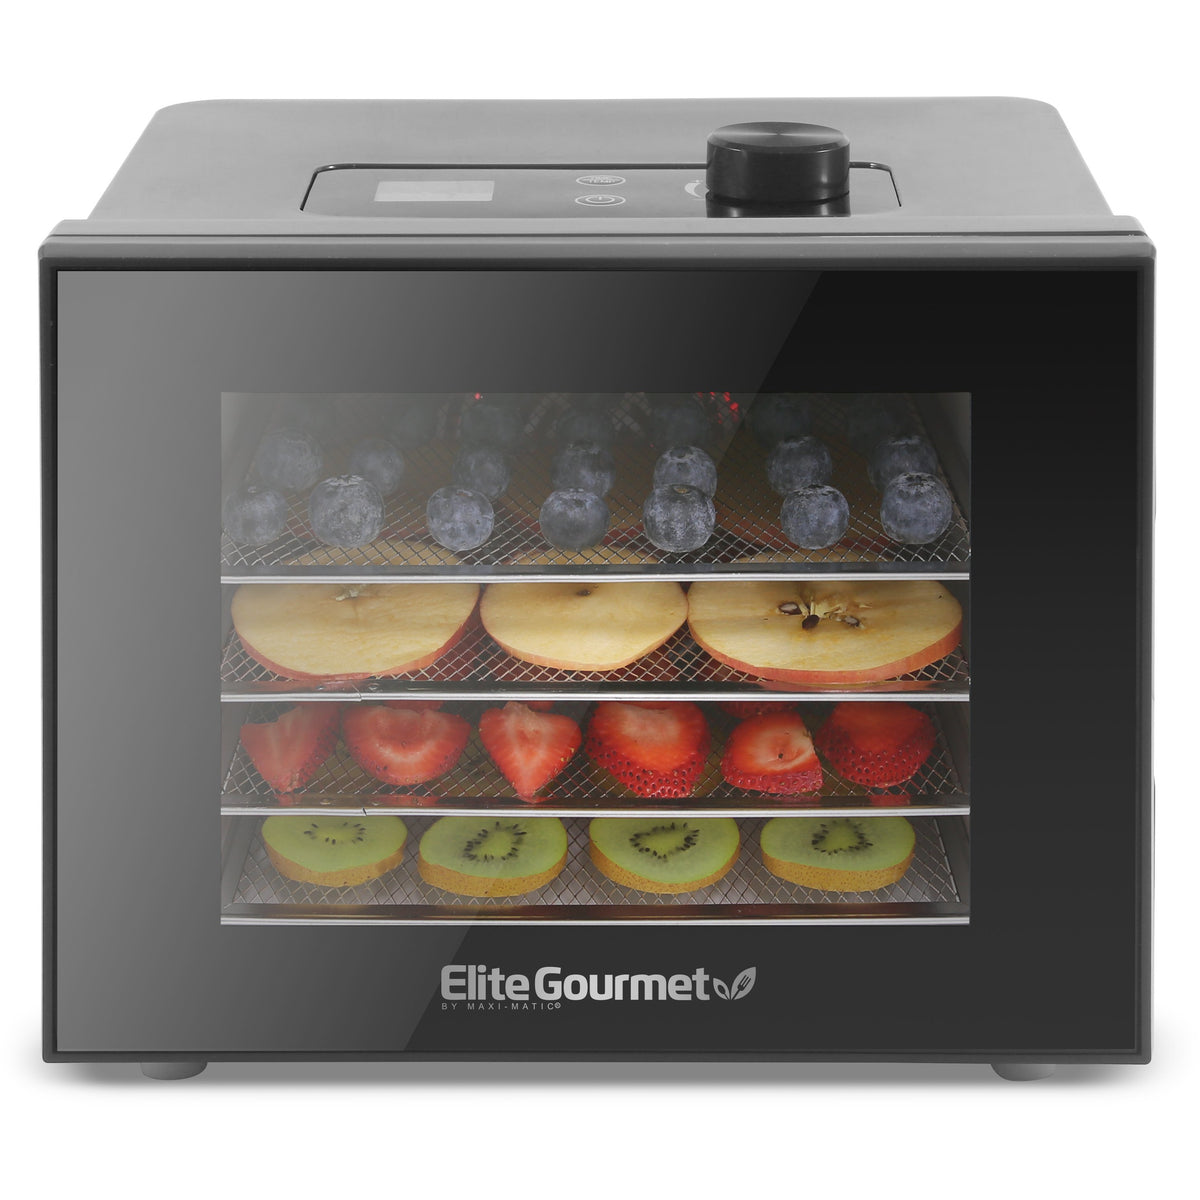 Elite Gourmet Dehydrator Trays Can Expand 